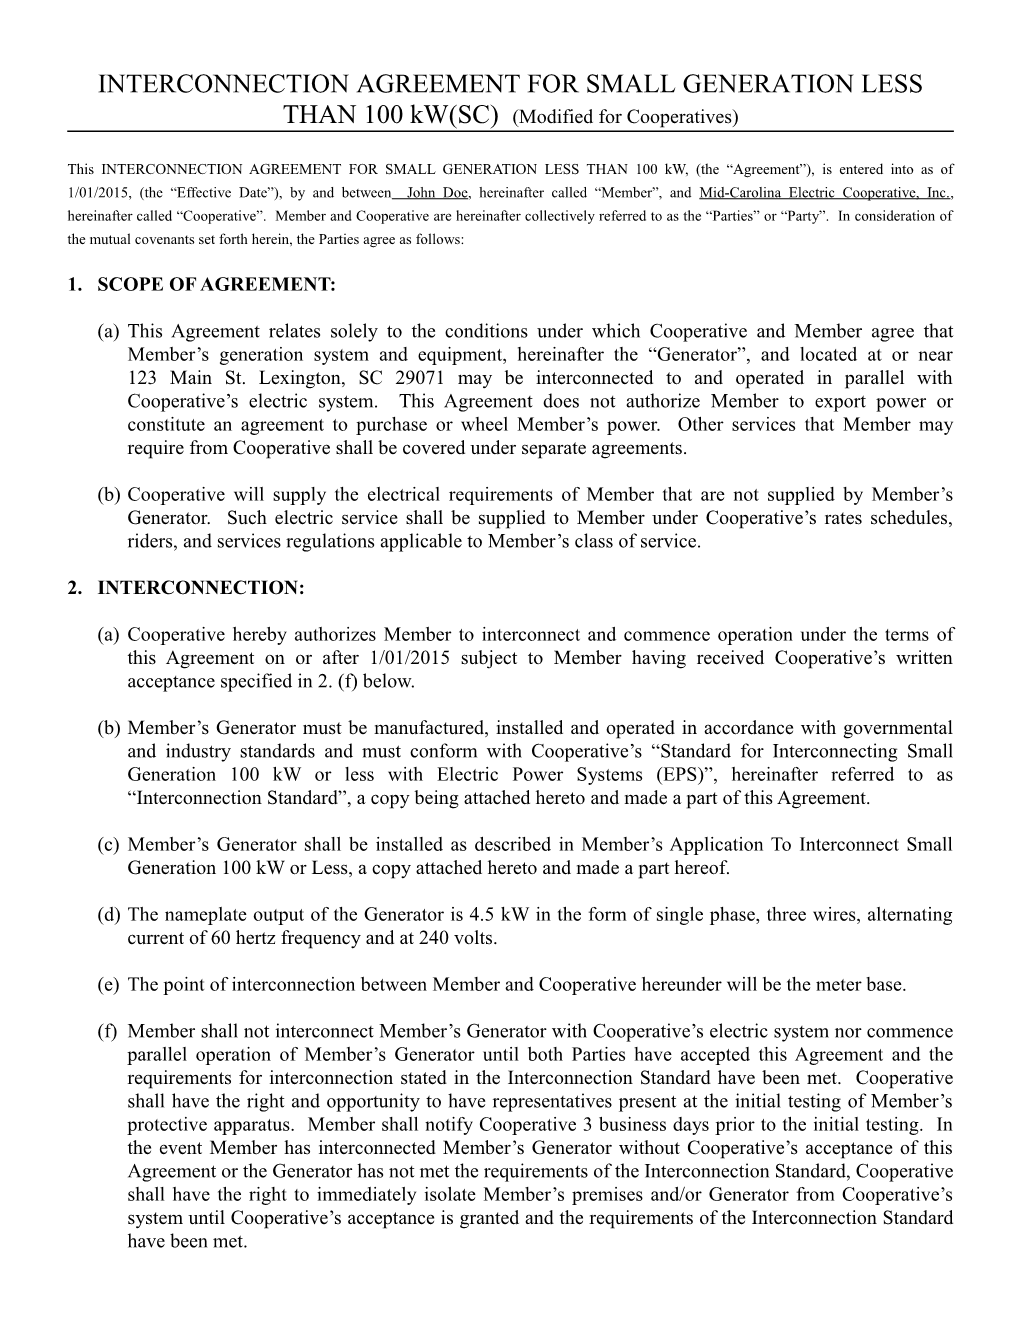 INTERCONNECTION AGREEMENT for SMALL GENERATION LESS THAN 100 Kw(SC) (Modified for Cooperatives)